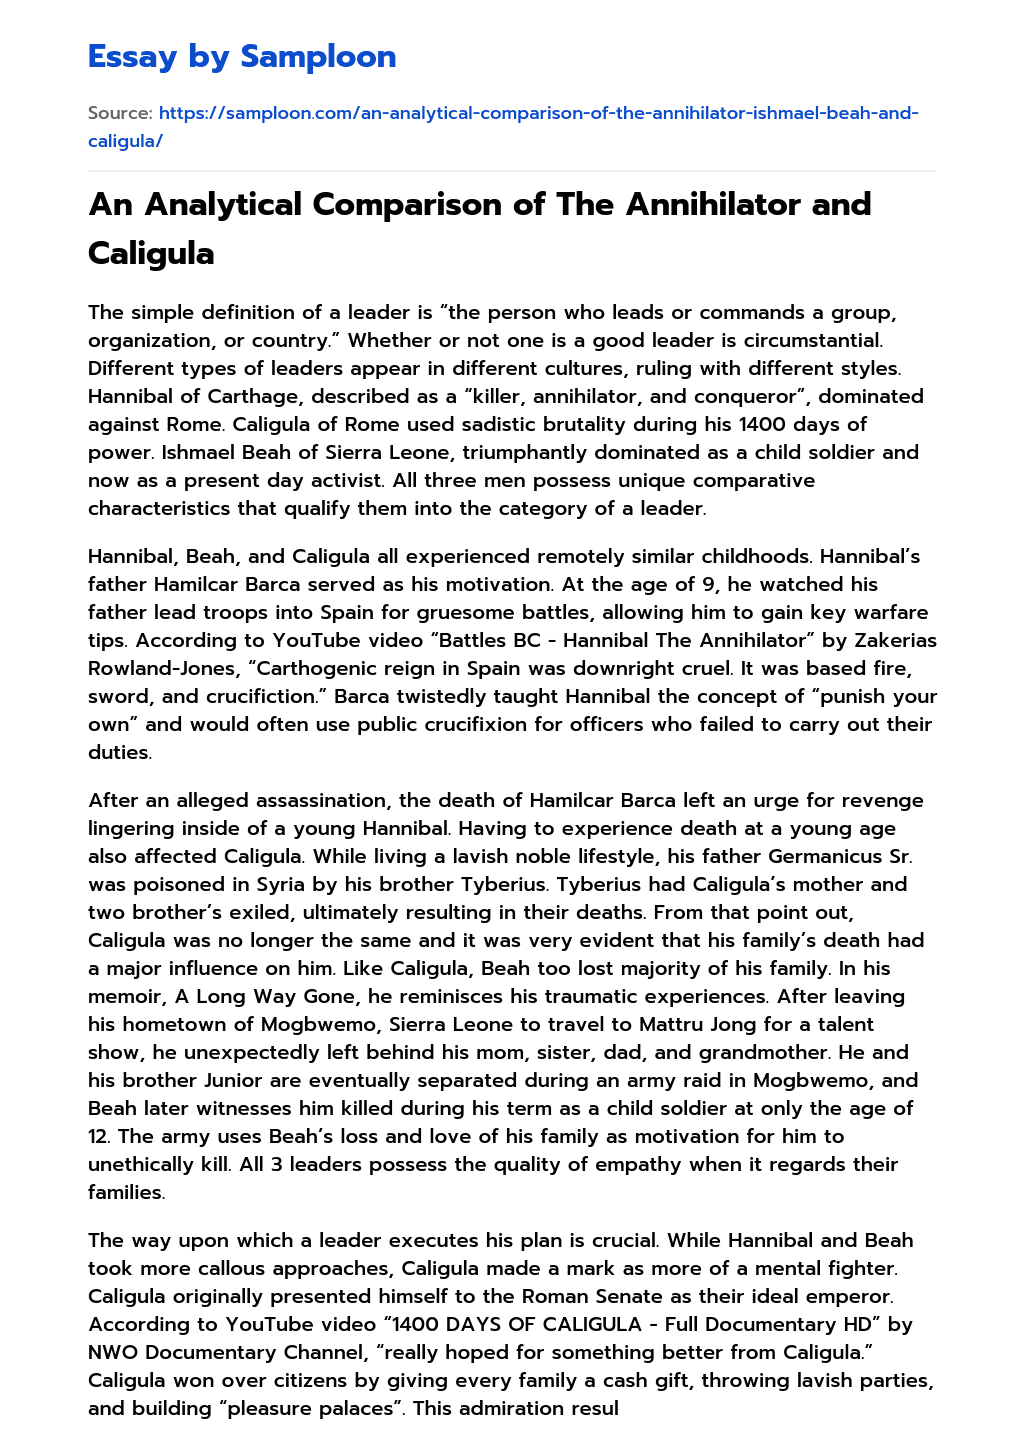 An Analytical Comparison of The Annihilator and Caligula  essay